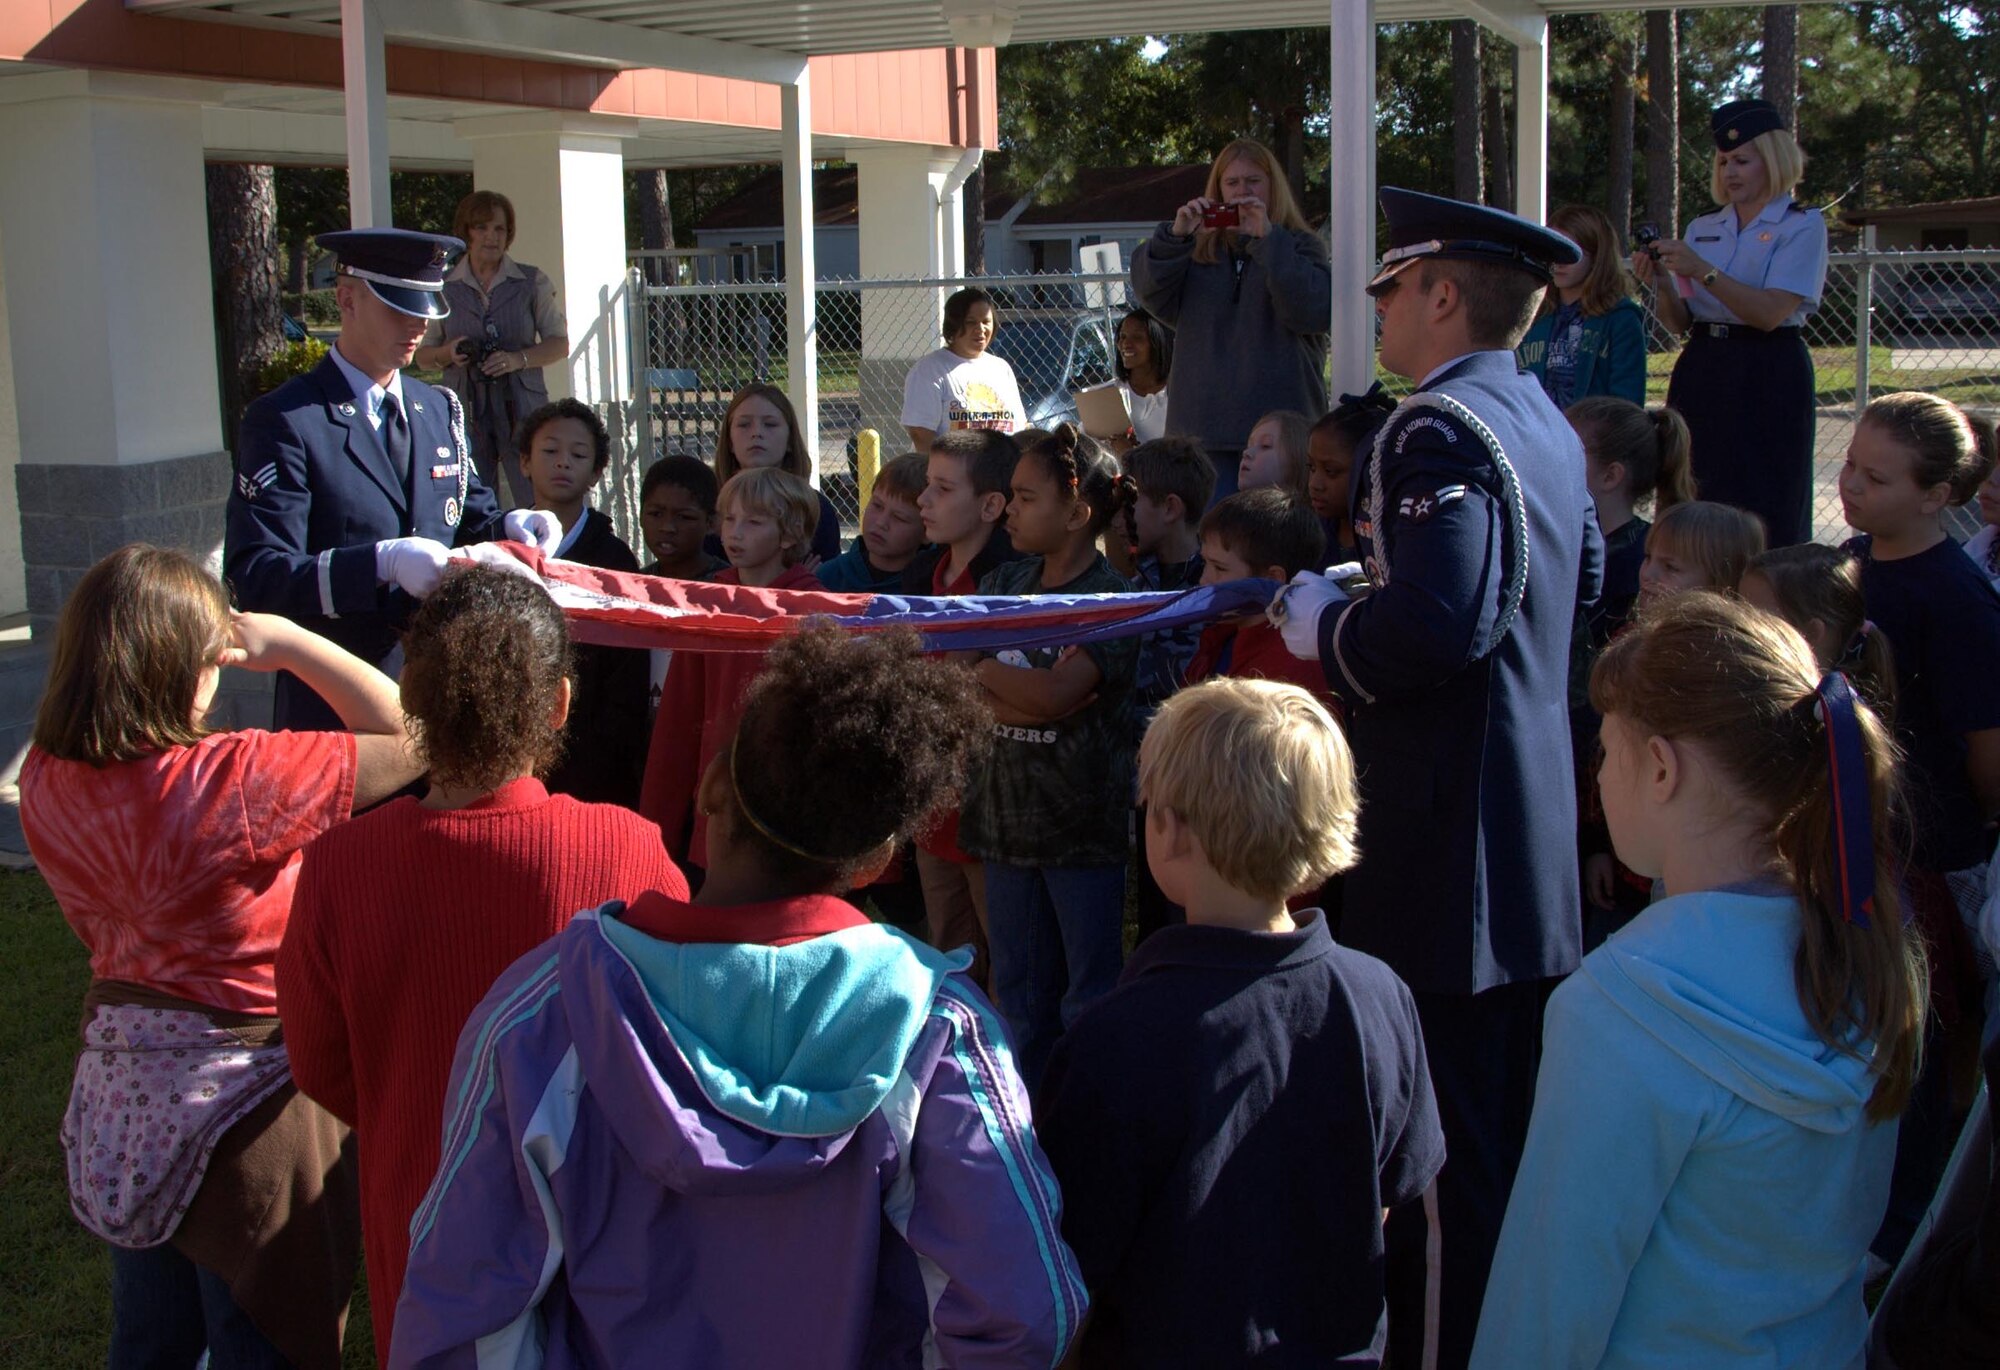 Senior Airman Gary Eaton and Airman First Class Blake Cooper from the 325th
Fighter Wing Honor Guard demonstrate proper American flag folding techniques
to Lynn Haven Elementary students Nov. 2.  The students are in charge of
raising and lowering the school flag each day. (U.S. Air Force photo by: Lt.
Col. Malcolm Kemeny)

